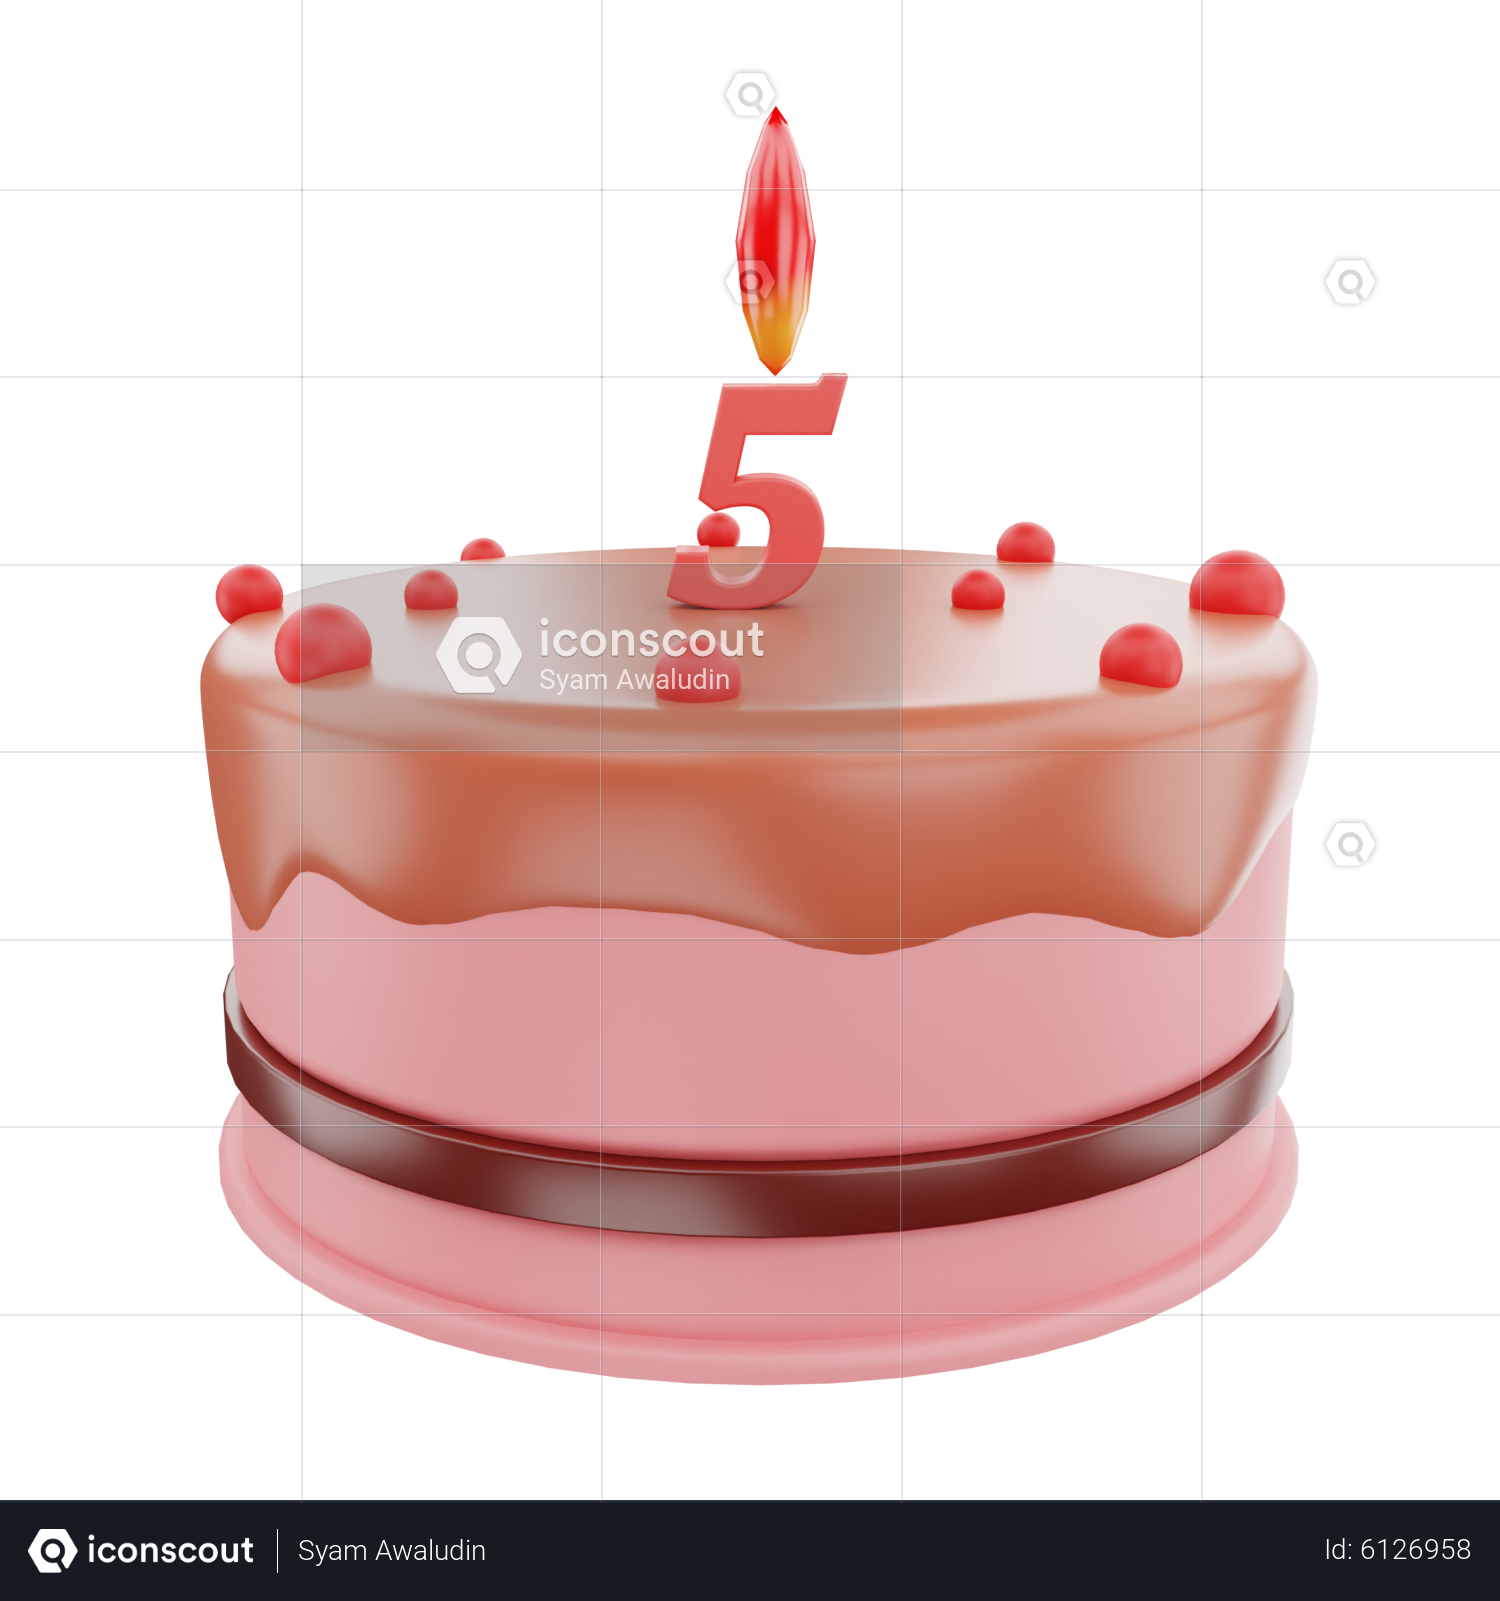 Cake 02 by 3DRivers 3D Model $10 - .obj .max .3ds - Free3D